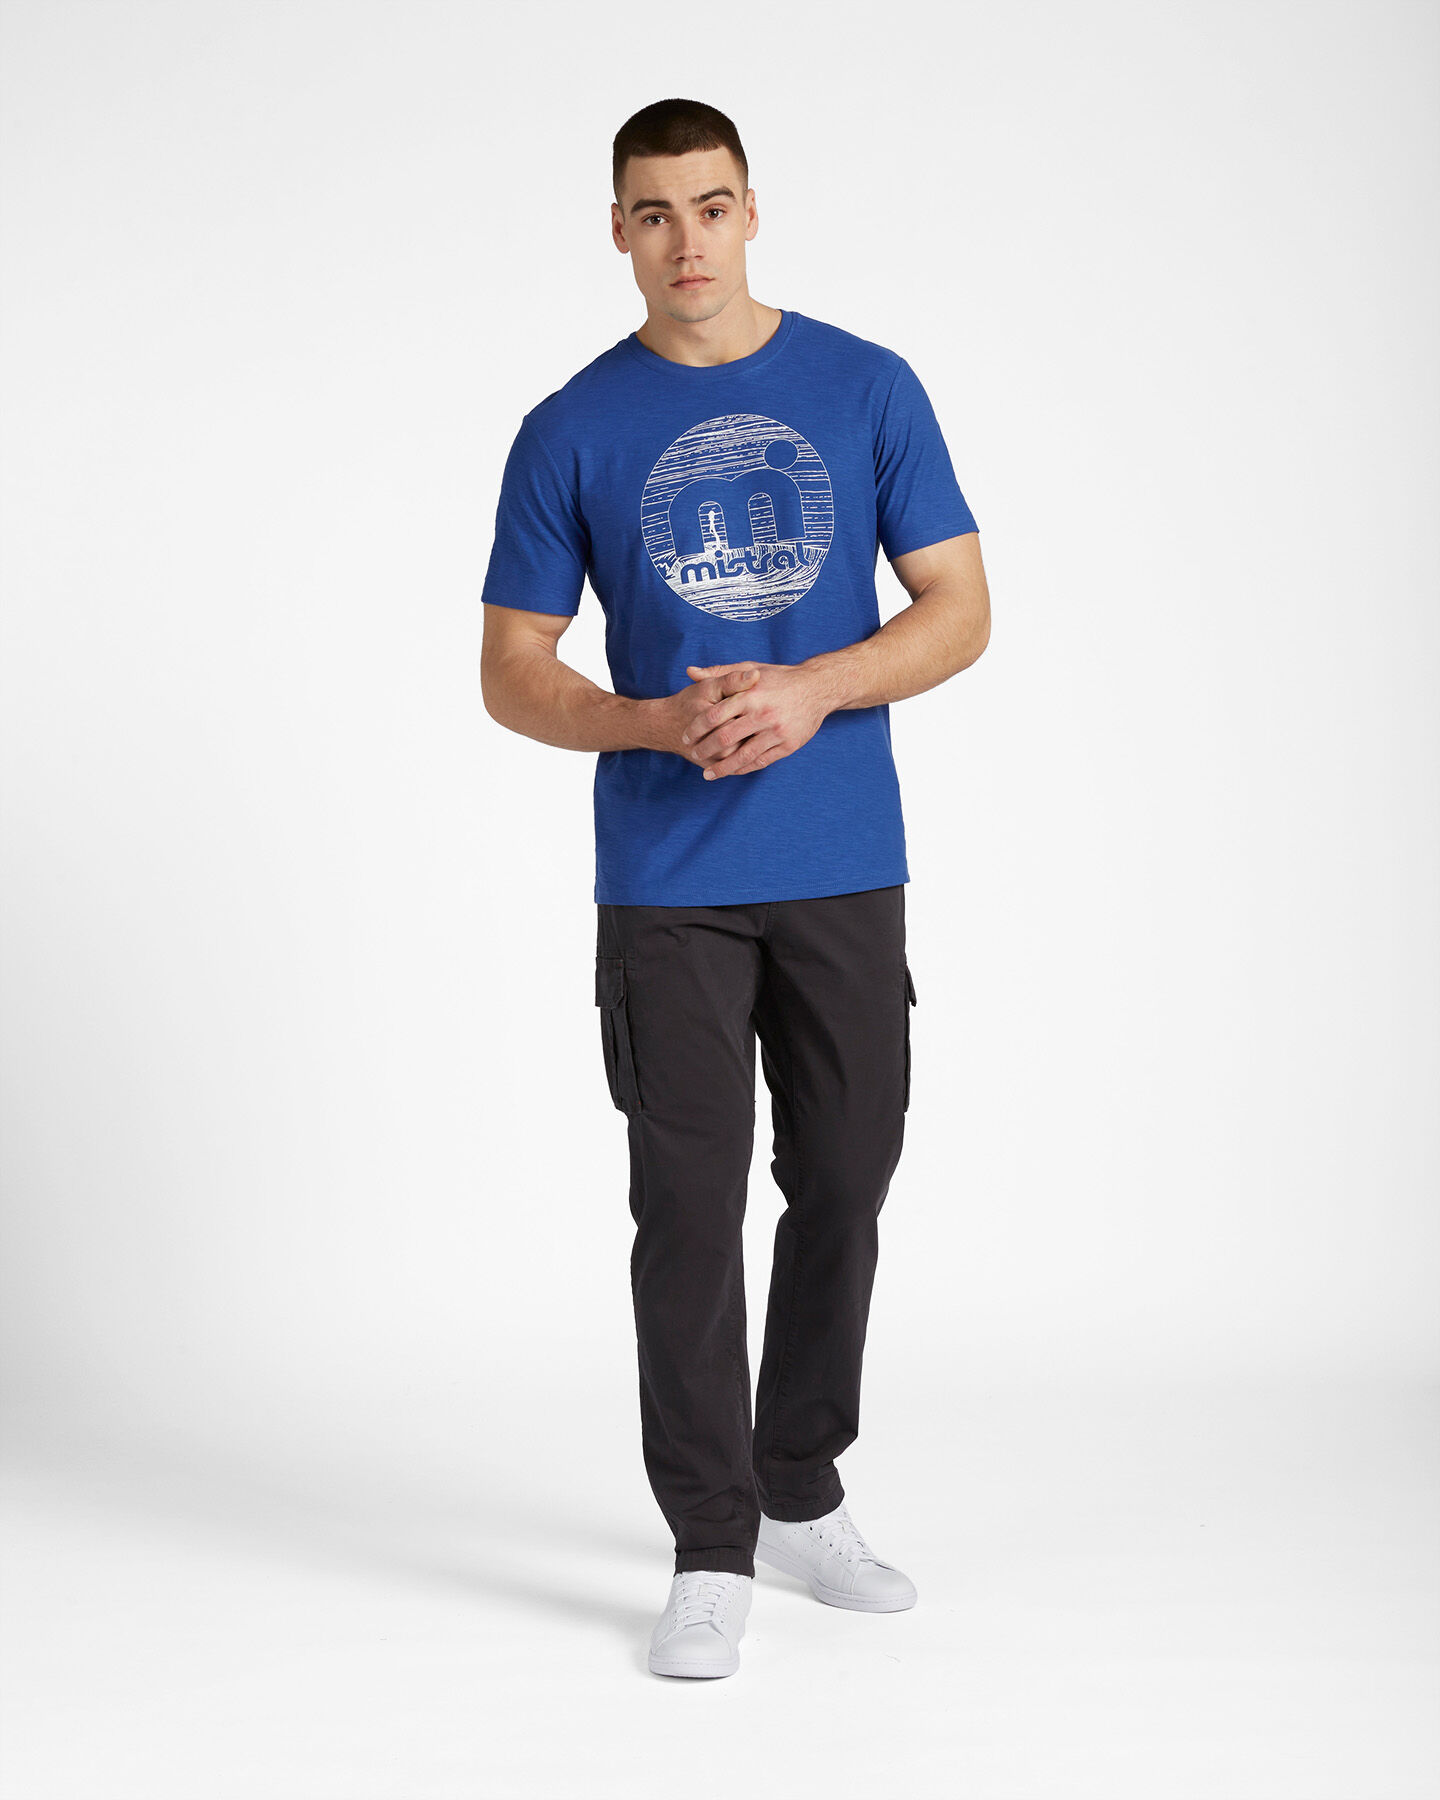  T-Shirt MISTRAL LOGO M S4100857|536|S scatto 1